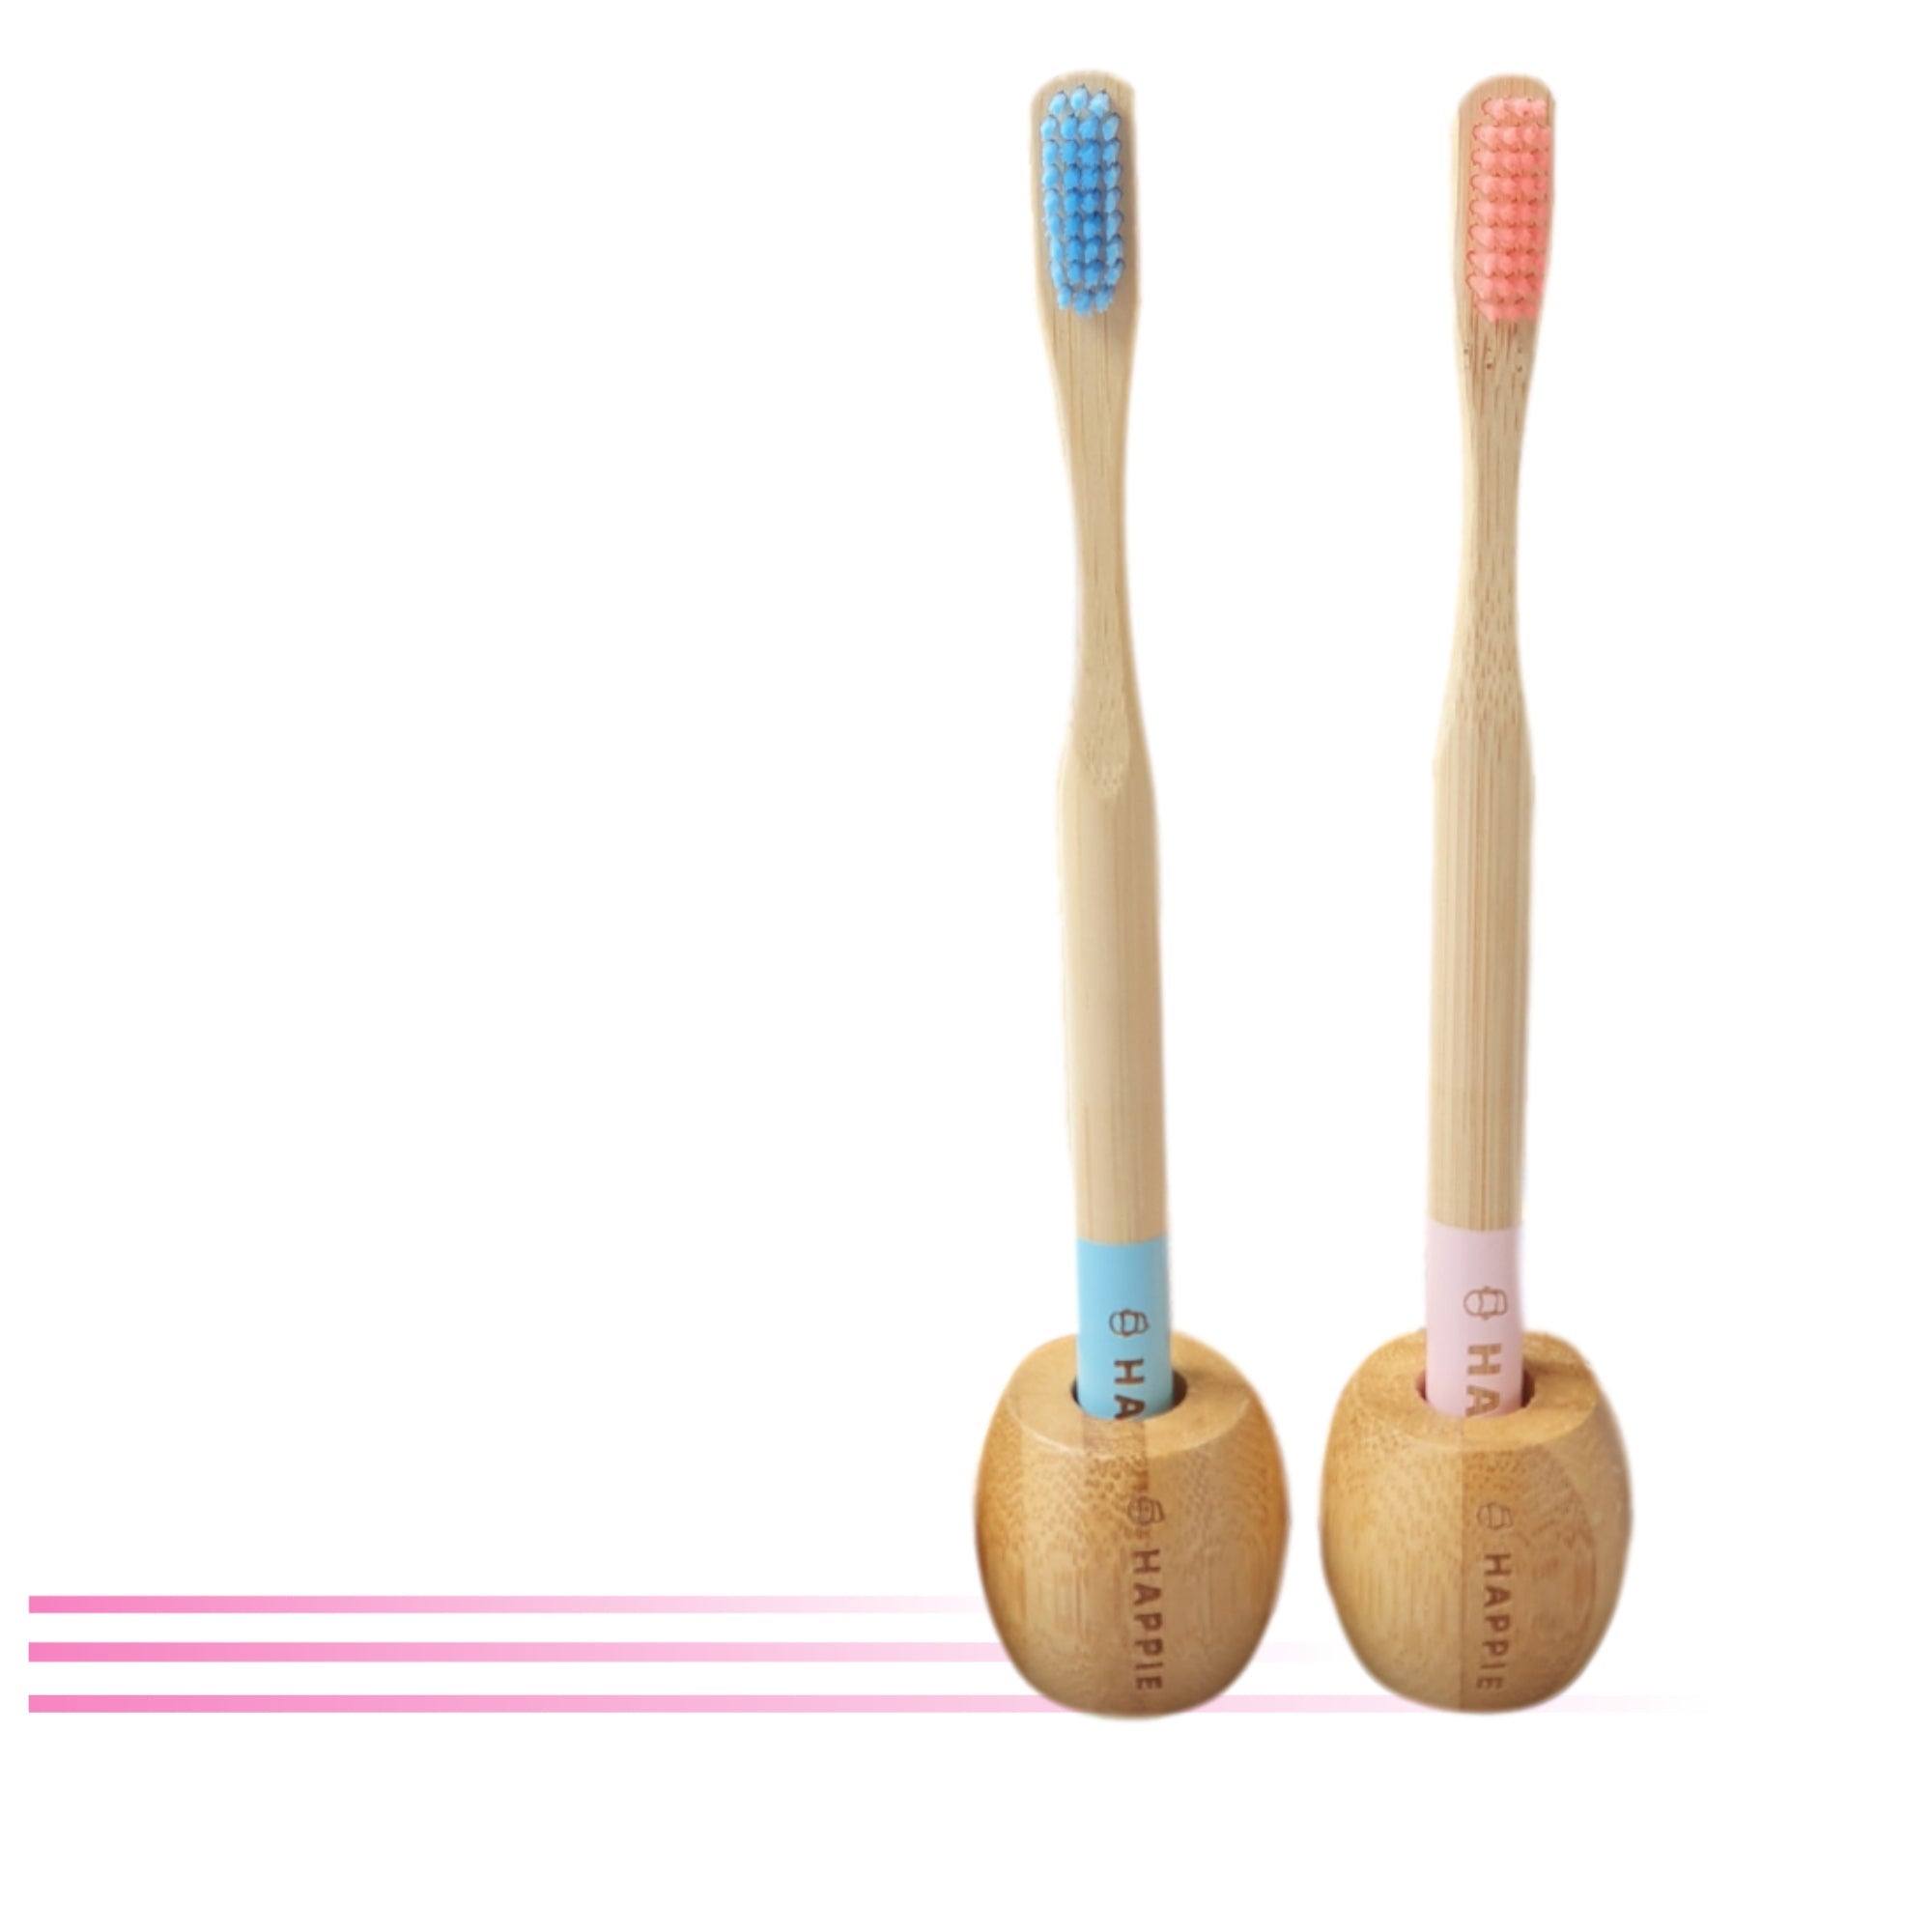 Starter Pack - 2 Toothbrushes with Holders